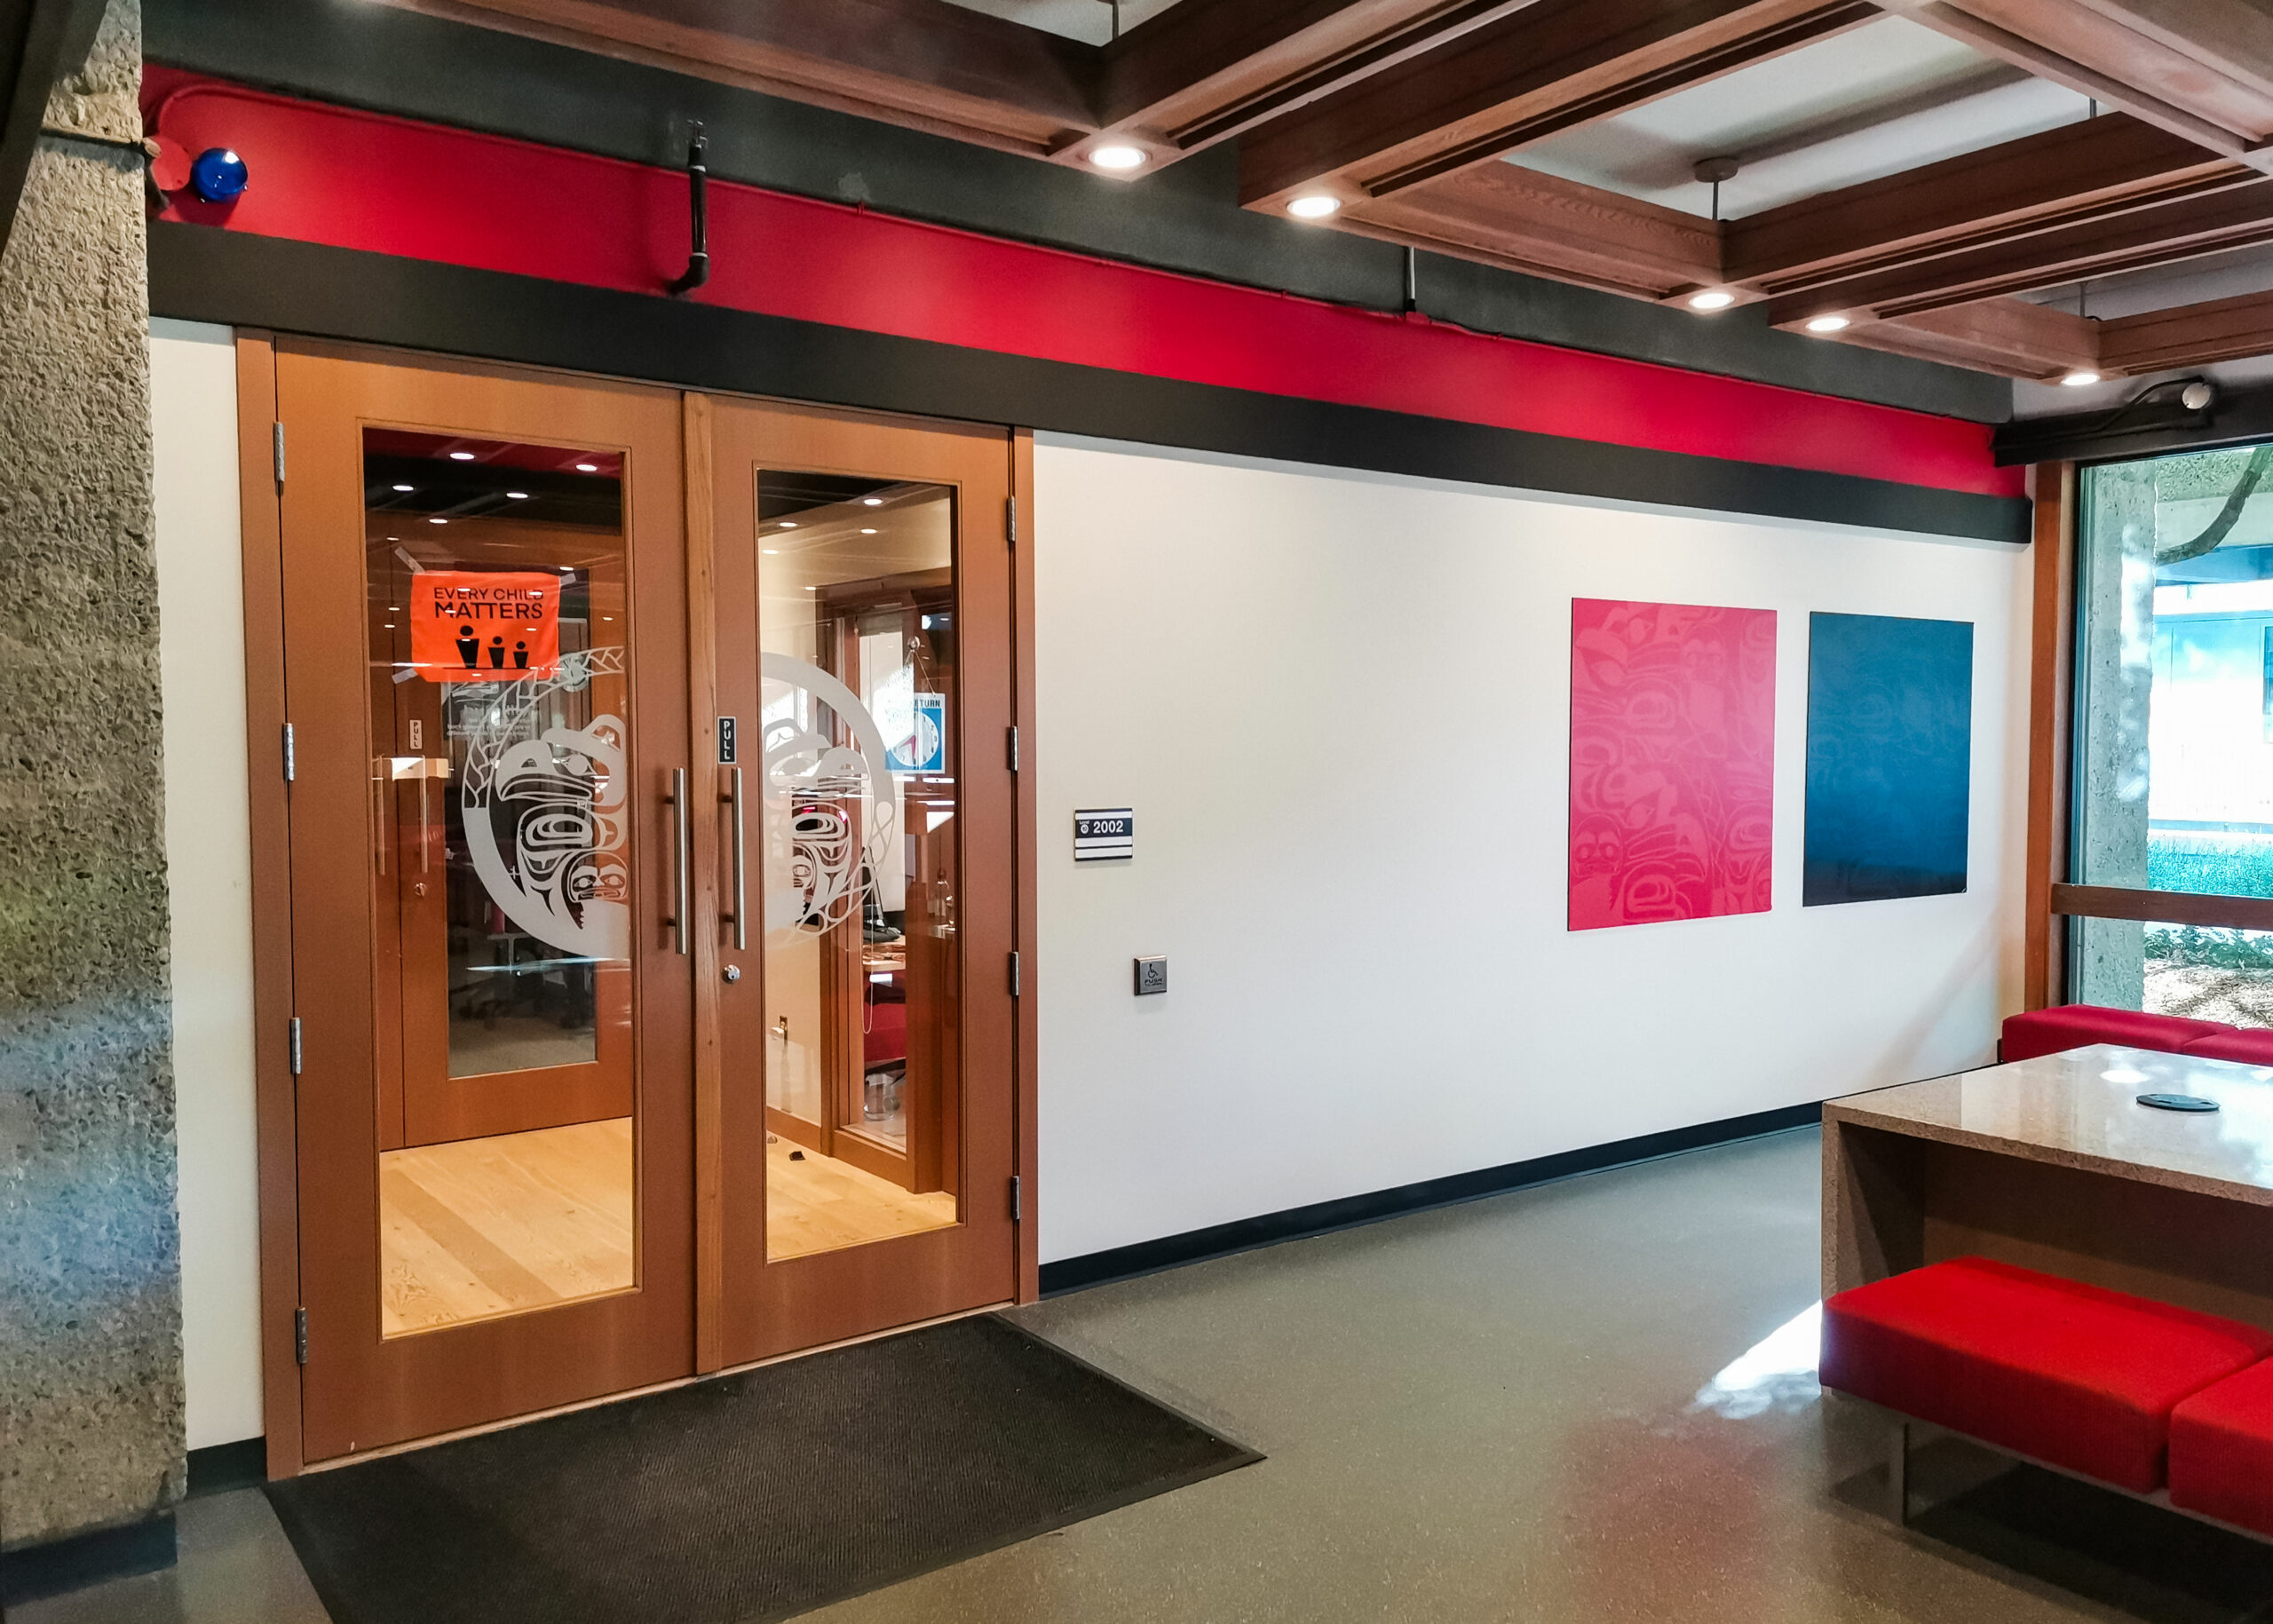 This is a photo of the Indigenous Student Centre on the SFU Burnaby campus. The doors to the office are shown, their name is printed on the door.